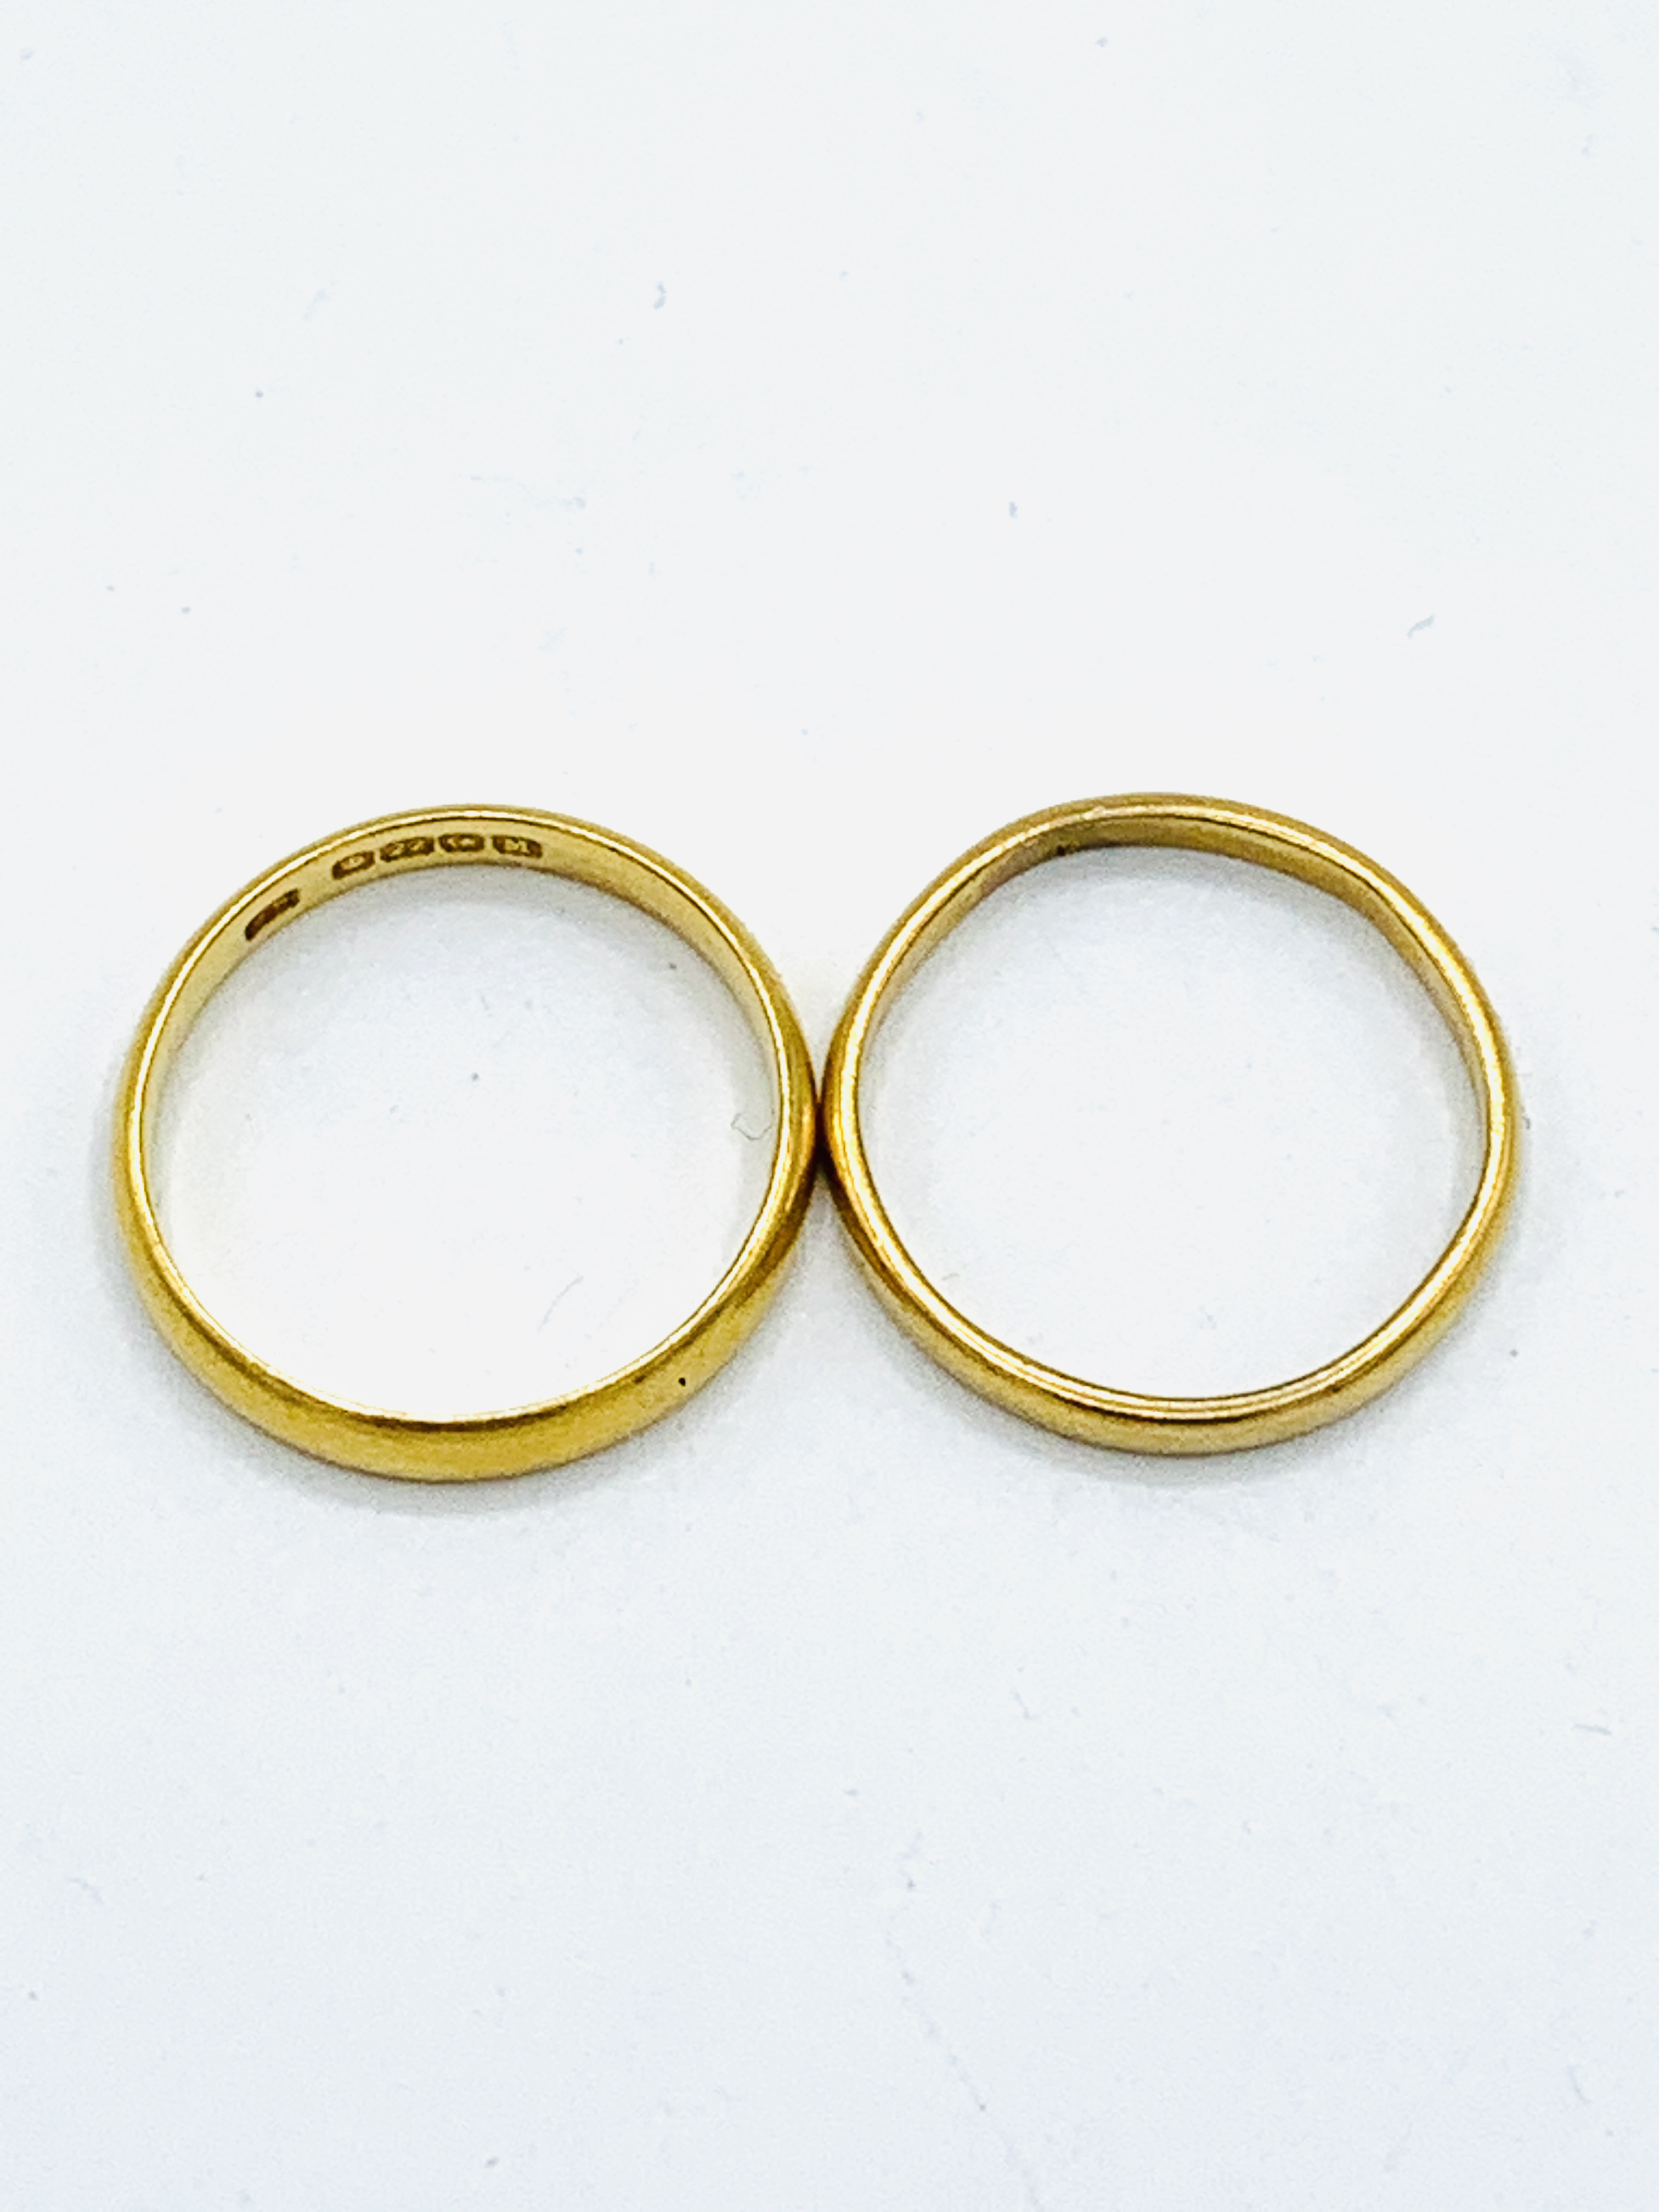 Two 22ct gold bands - Image 3 of 3